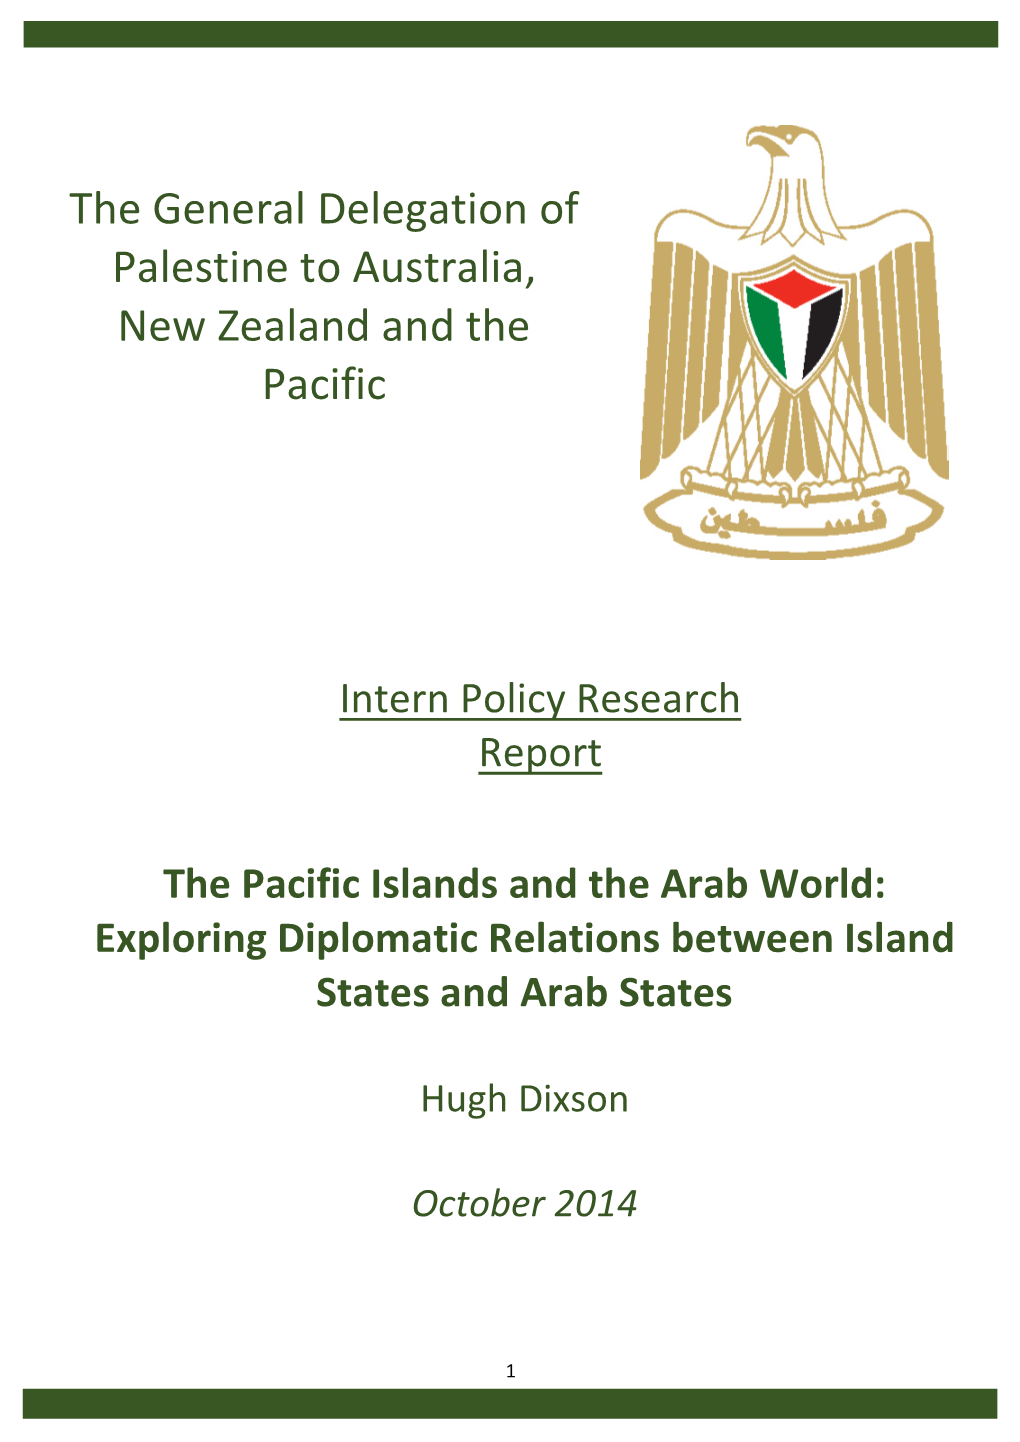 The Pacific Islands and the Arab World: Exploring Diplomatic Relations Between Island States and Arab States